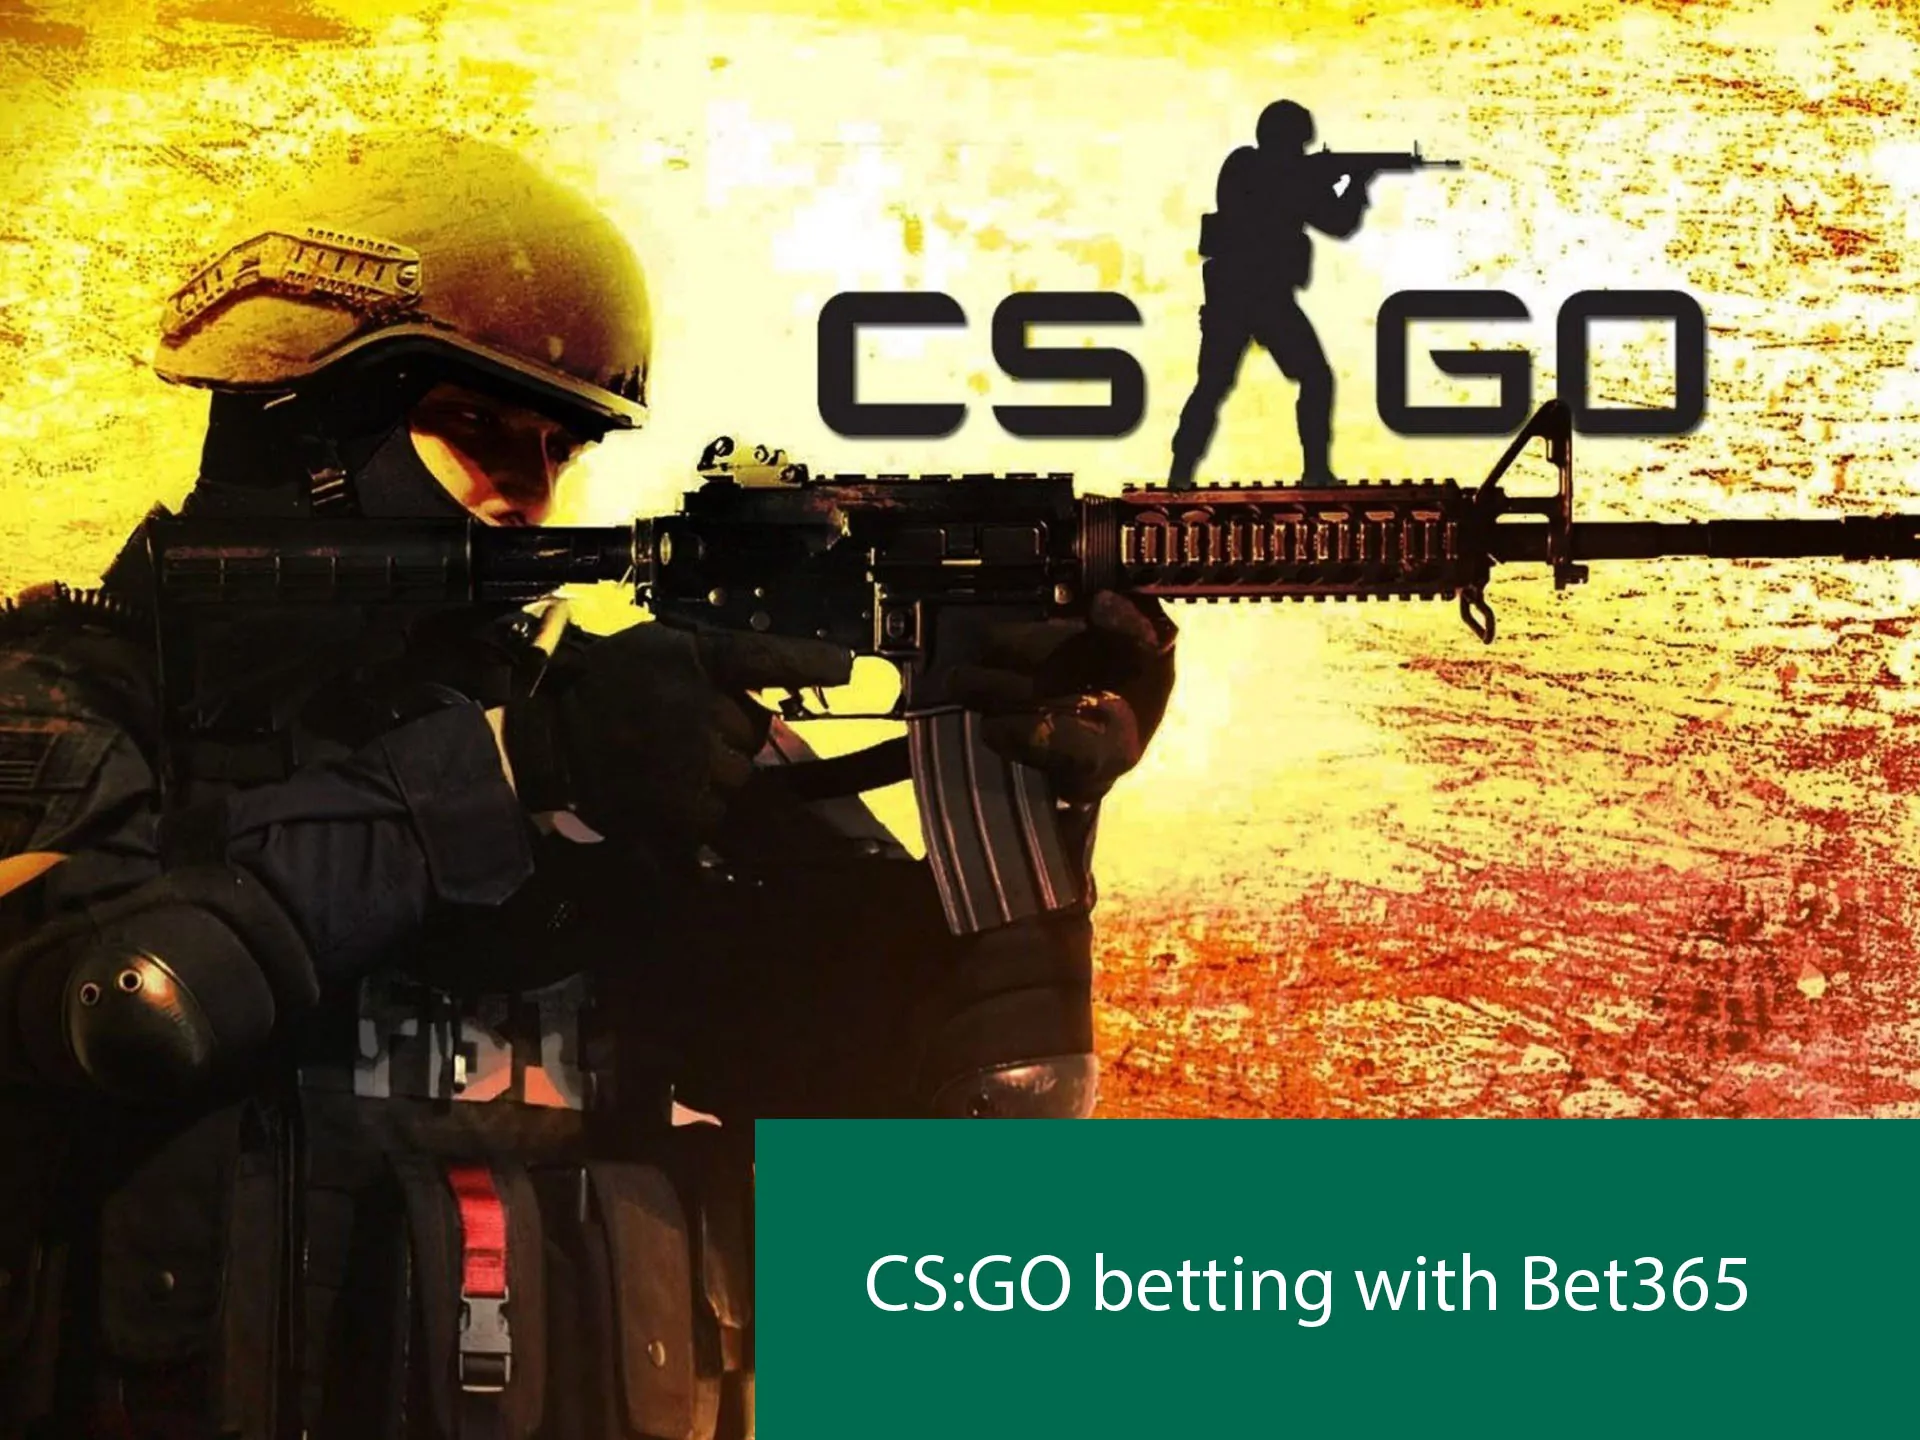 CS GO Betting with 365bet has unusual types of betting beyond the basics.